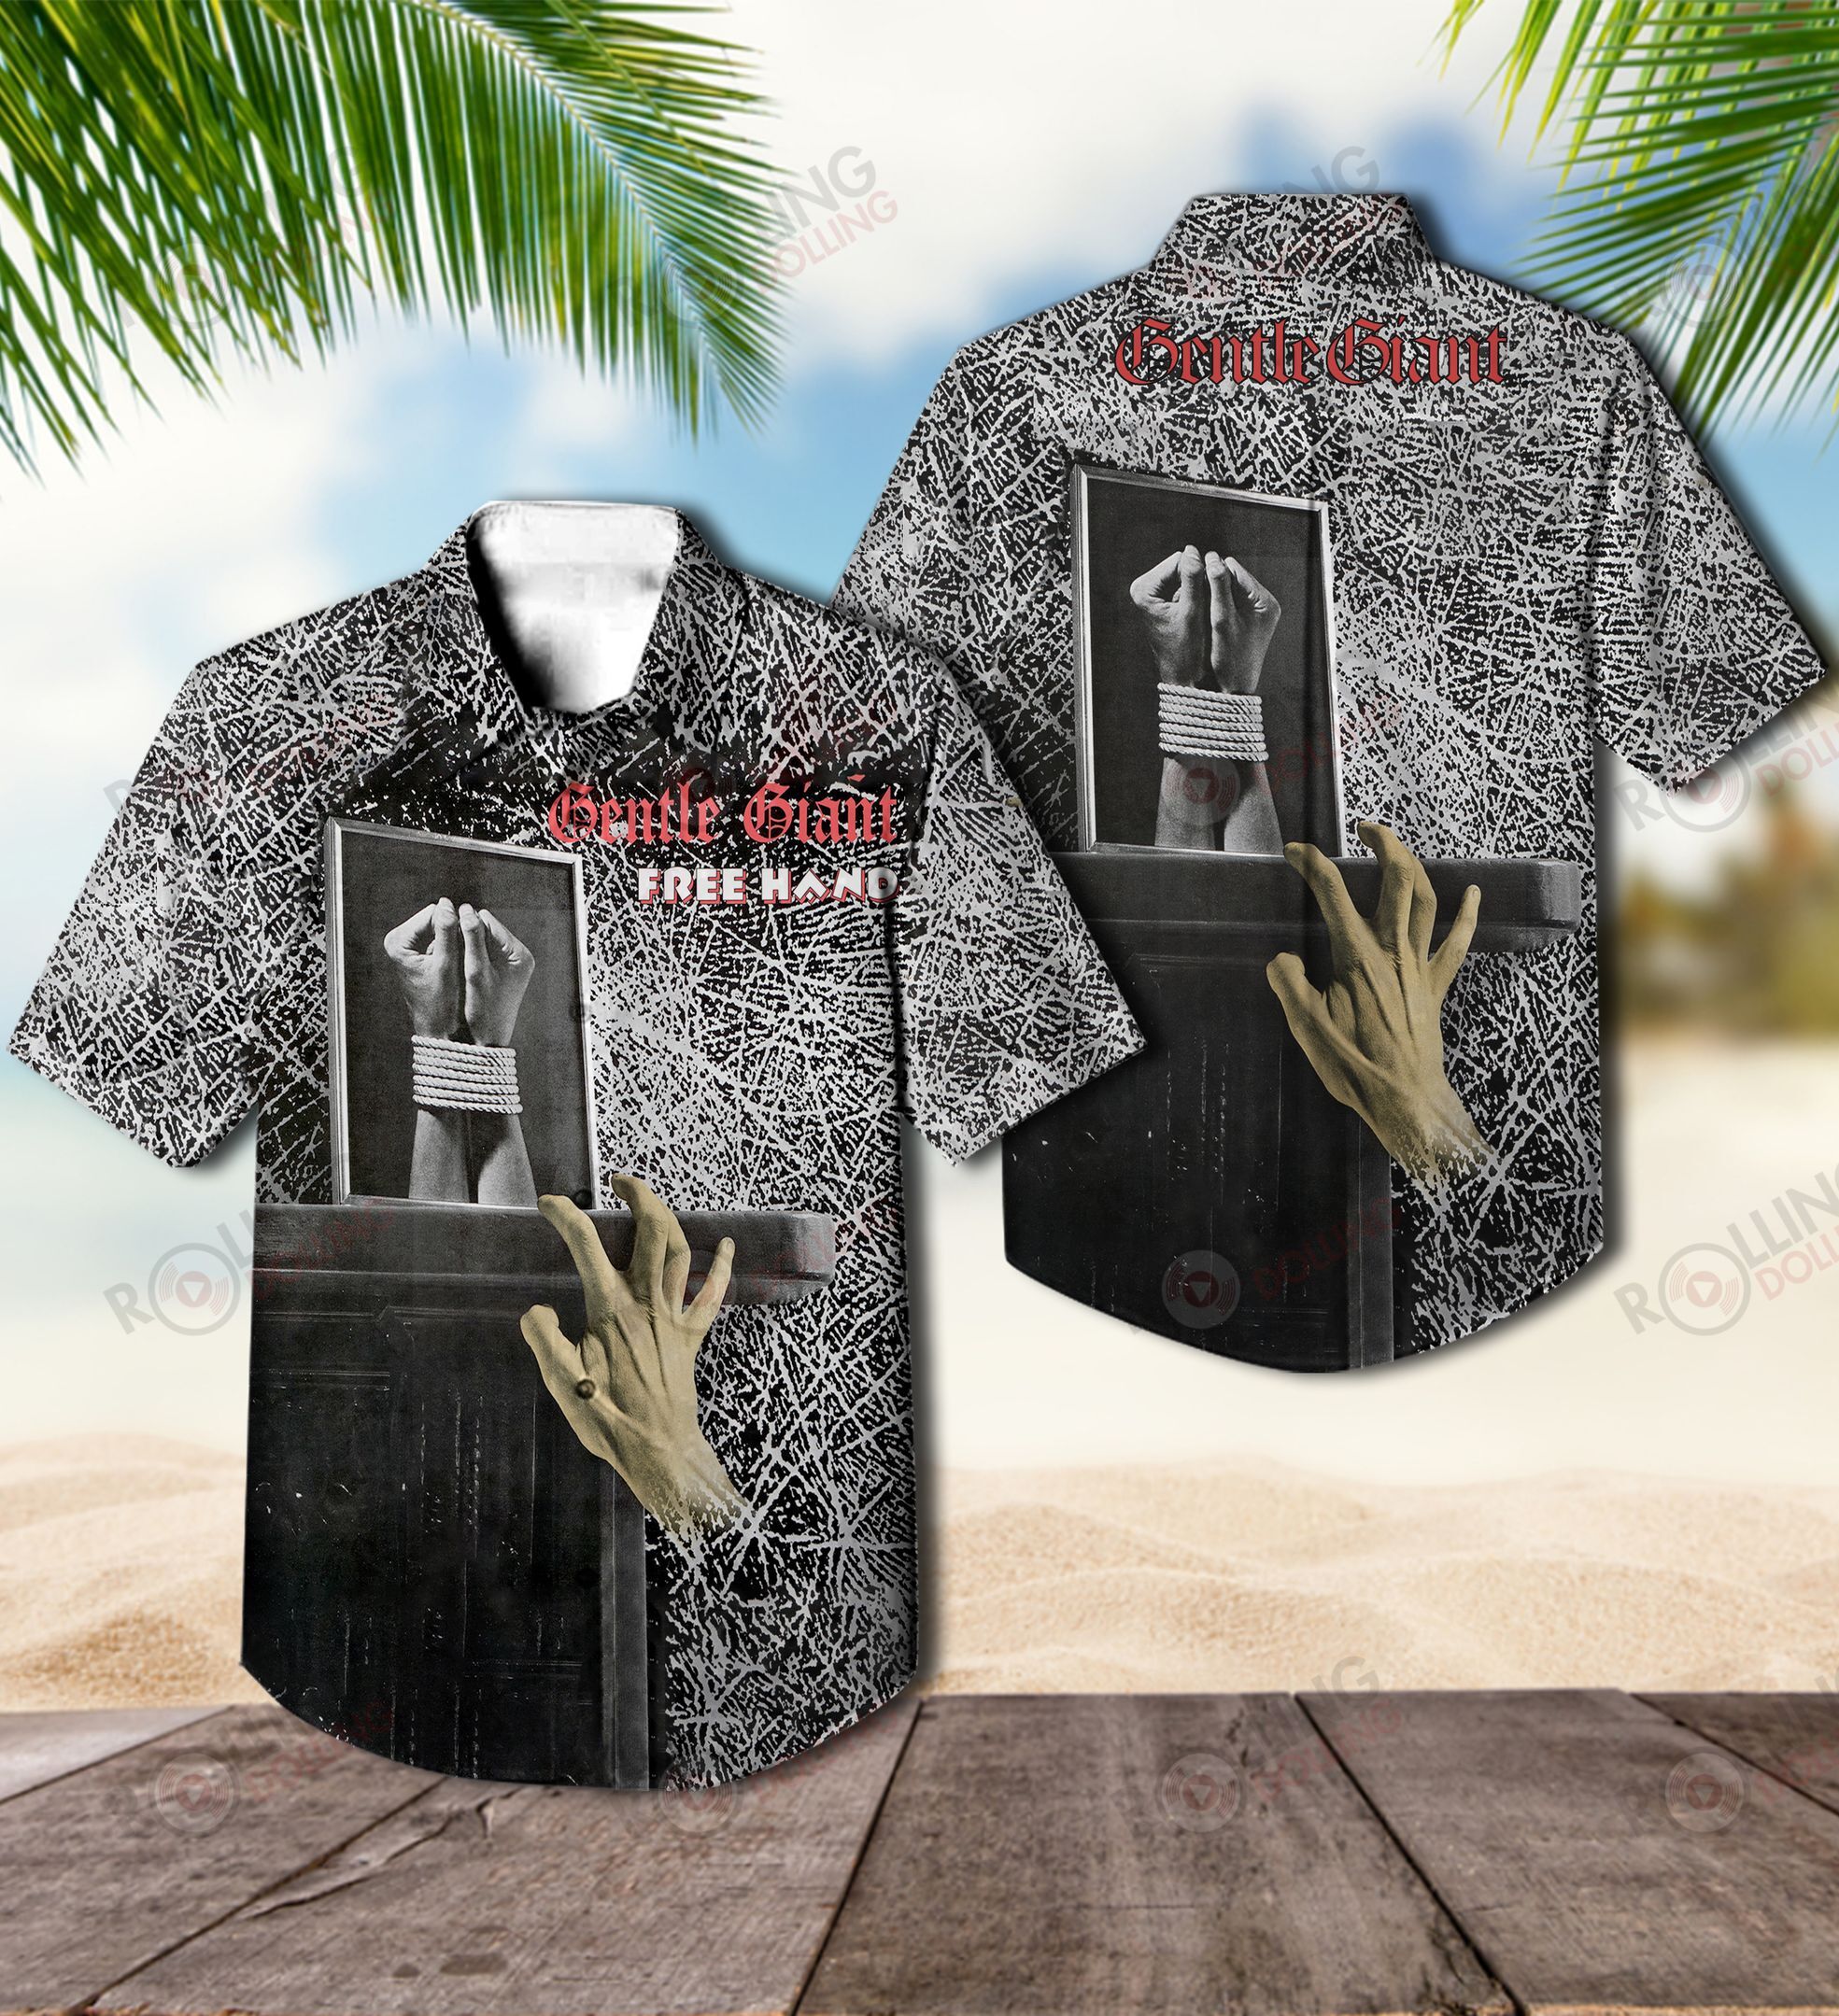 For summer, consider wearing This Amazing Hawaiian Shirt shirt in our store 69